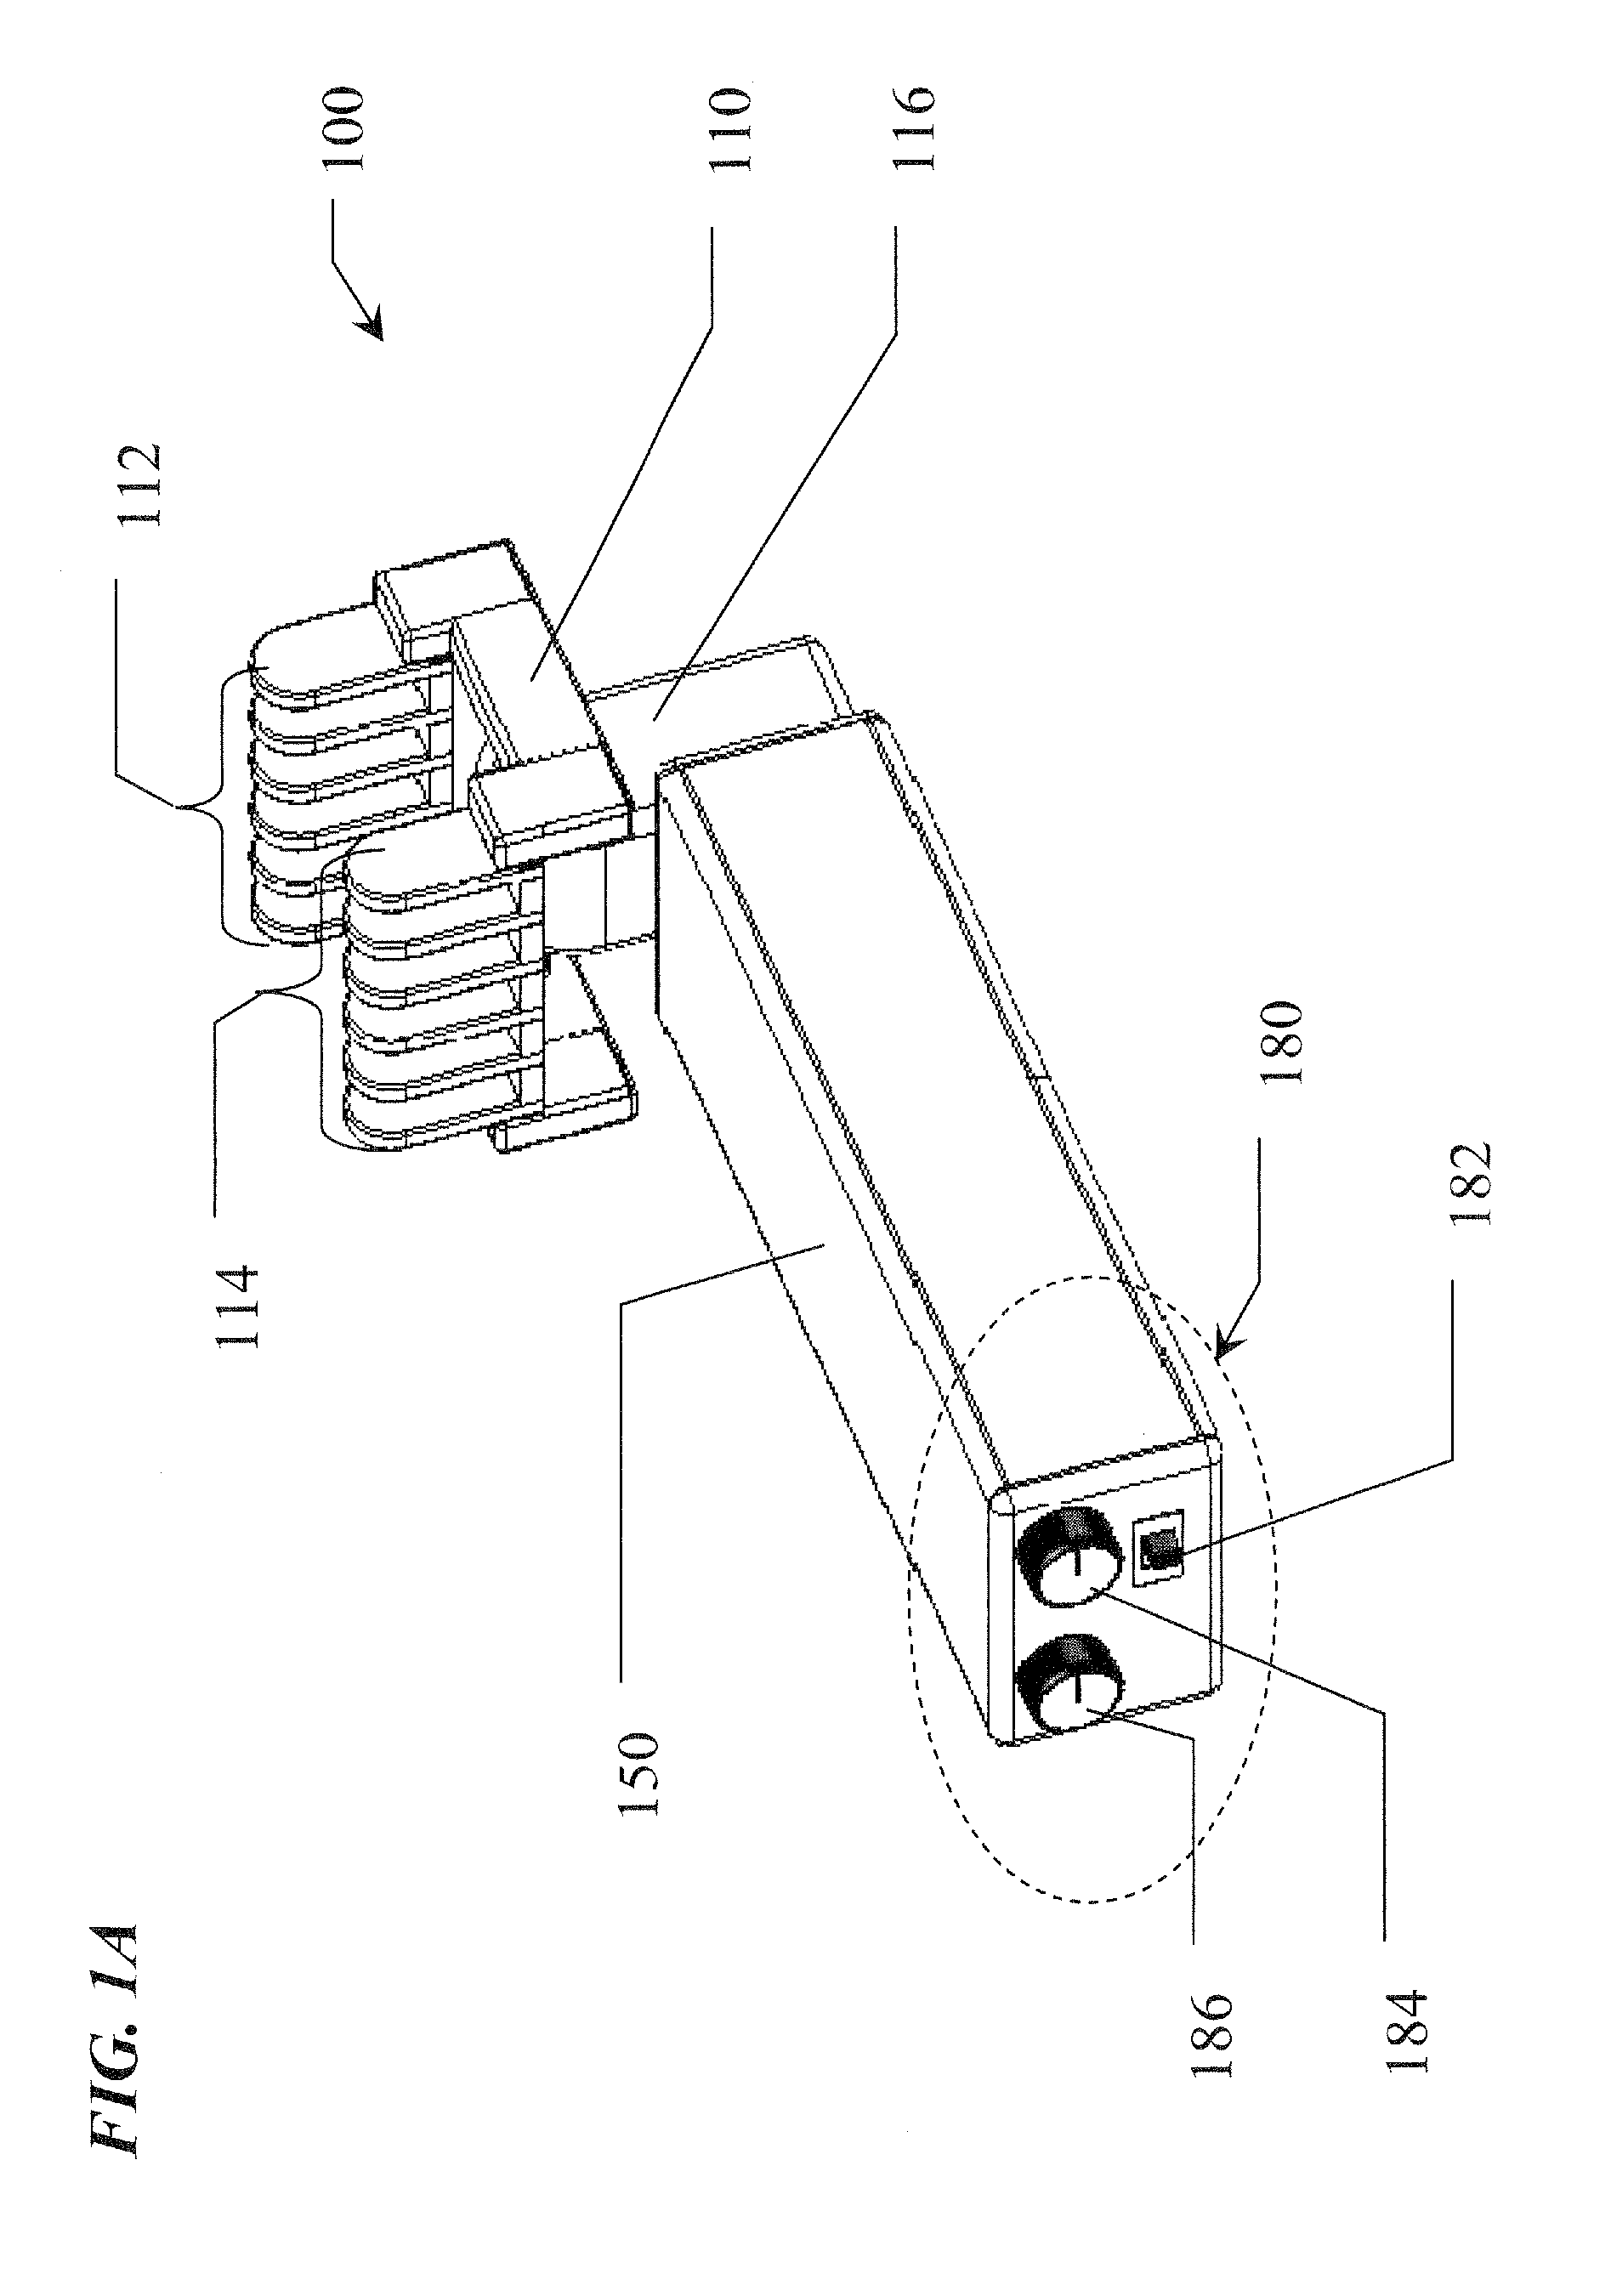 Apparatus and method for the treatment of headache